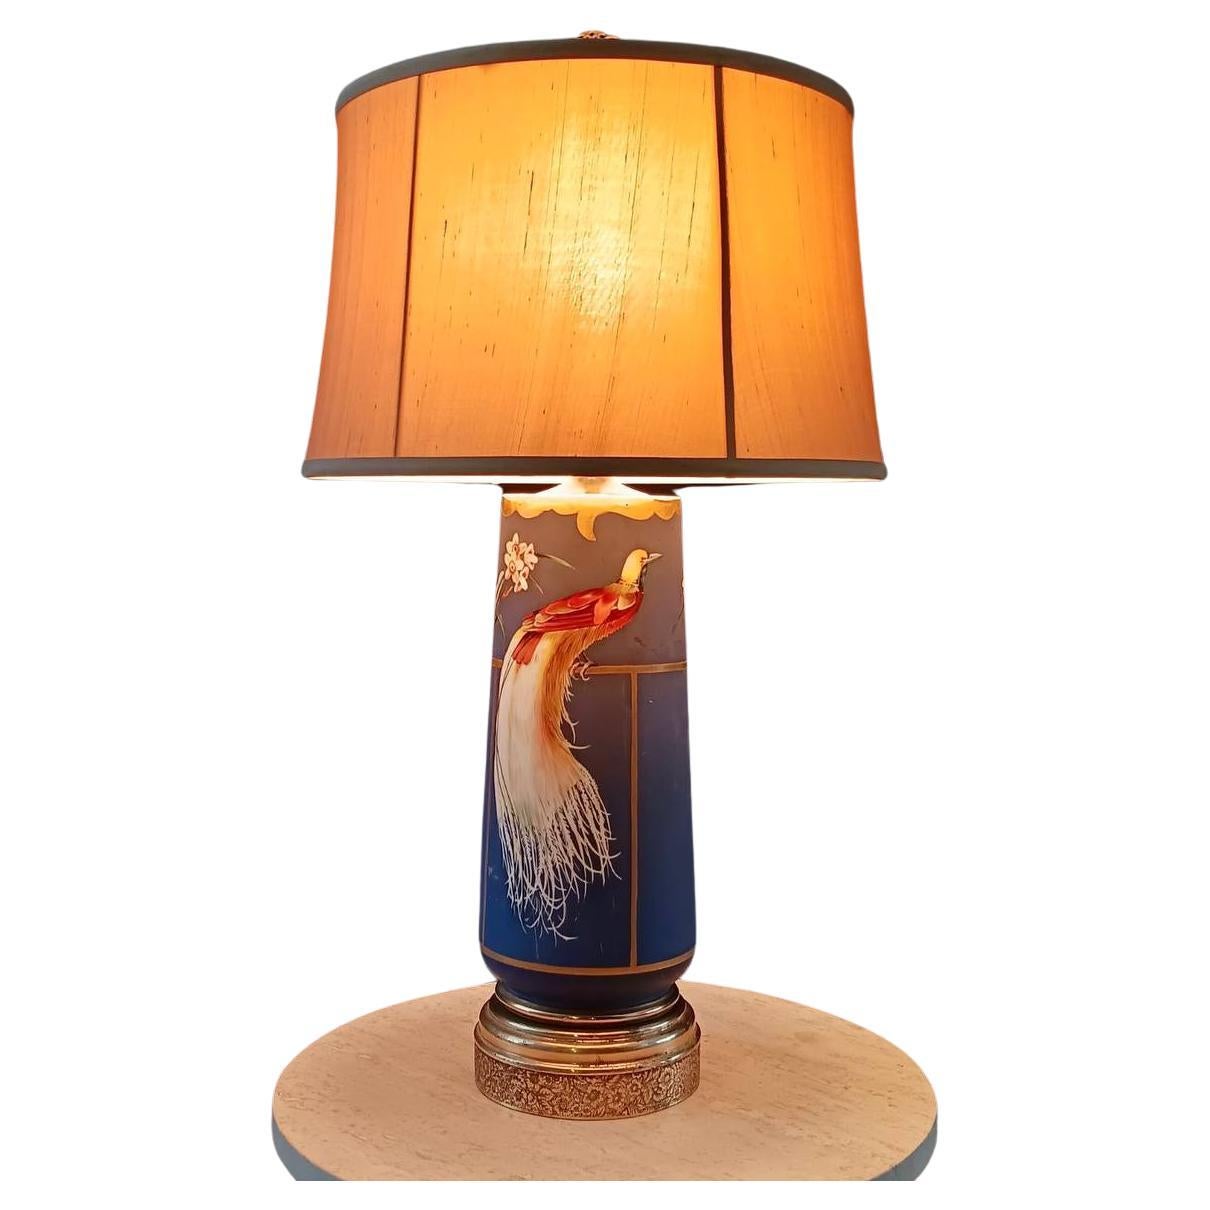 Vintage French Porcelain & Brass Table Lamp with Bird Motif